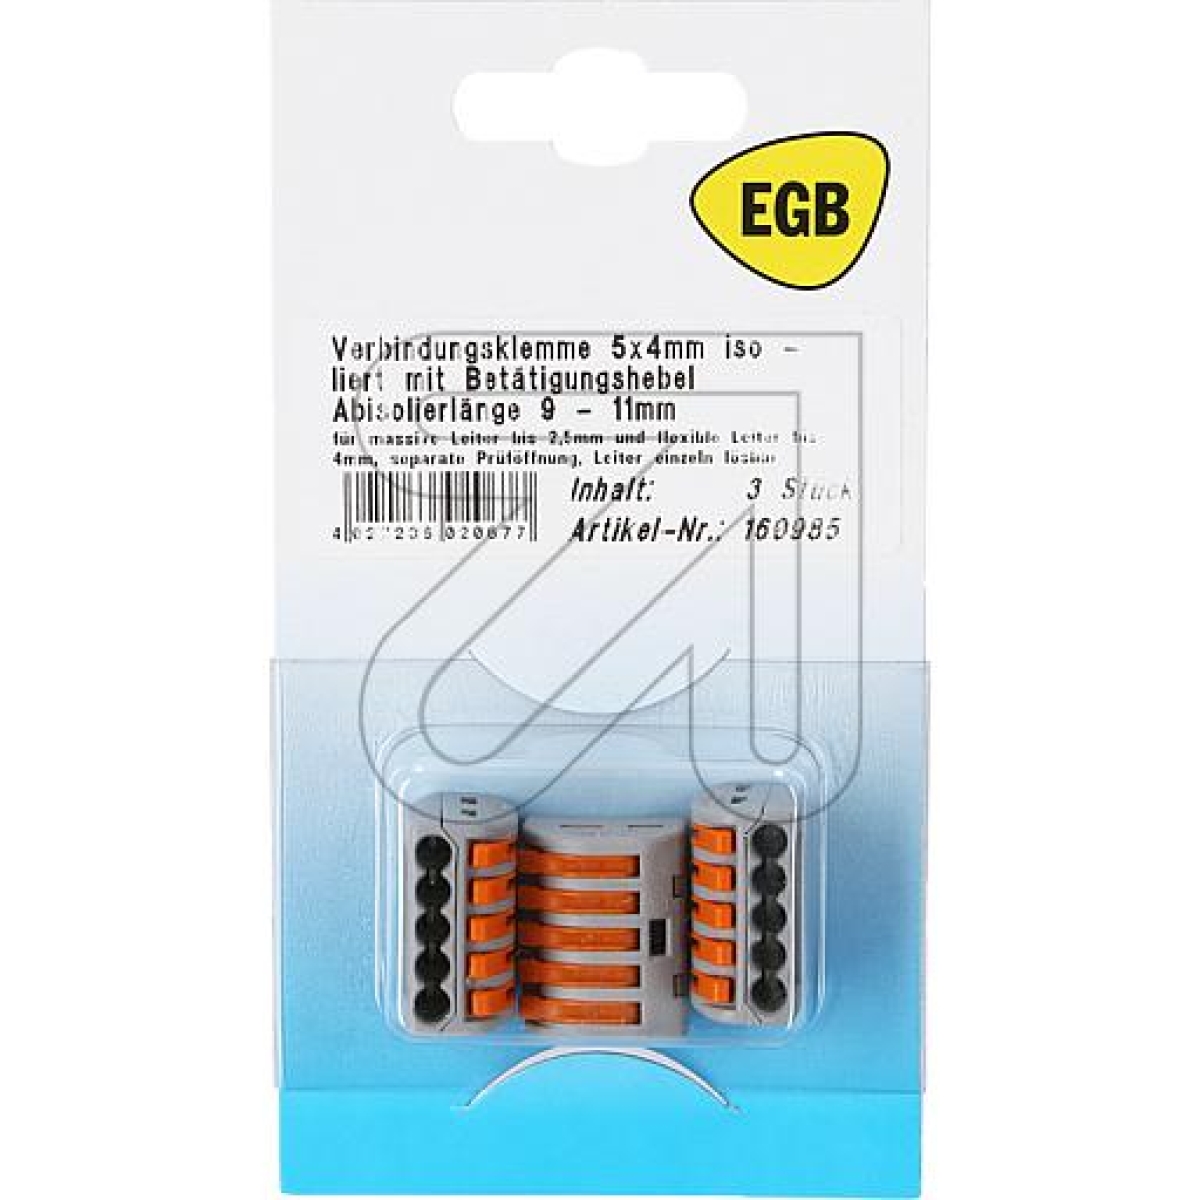 EGBSB WAGO connecting clamp 5x4 (3 pieces)-Price for 3 pcs.Article-No: 160985